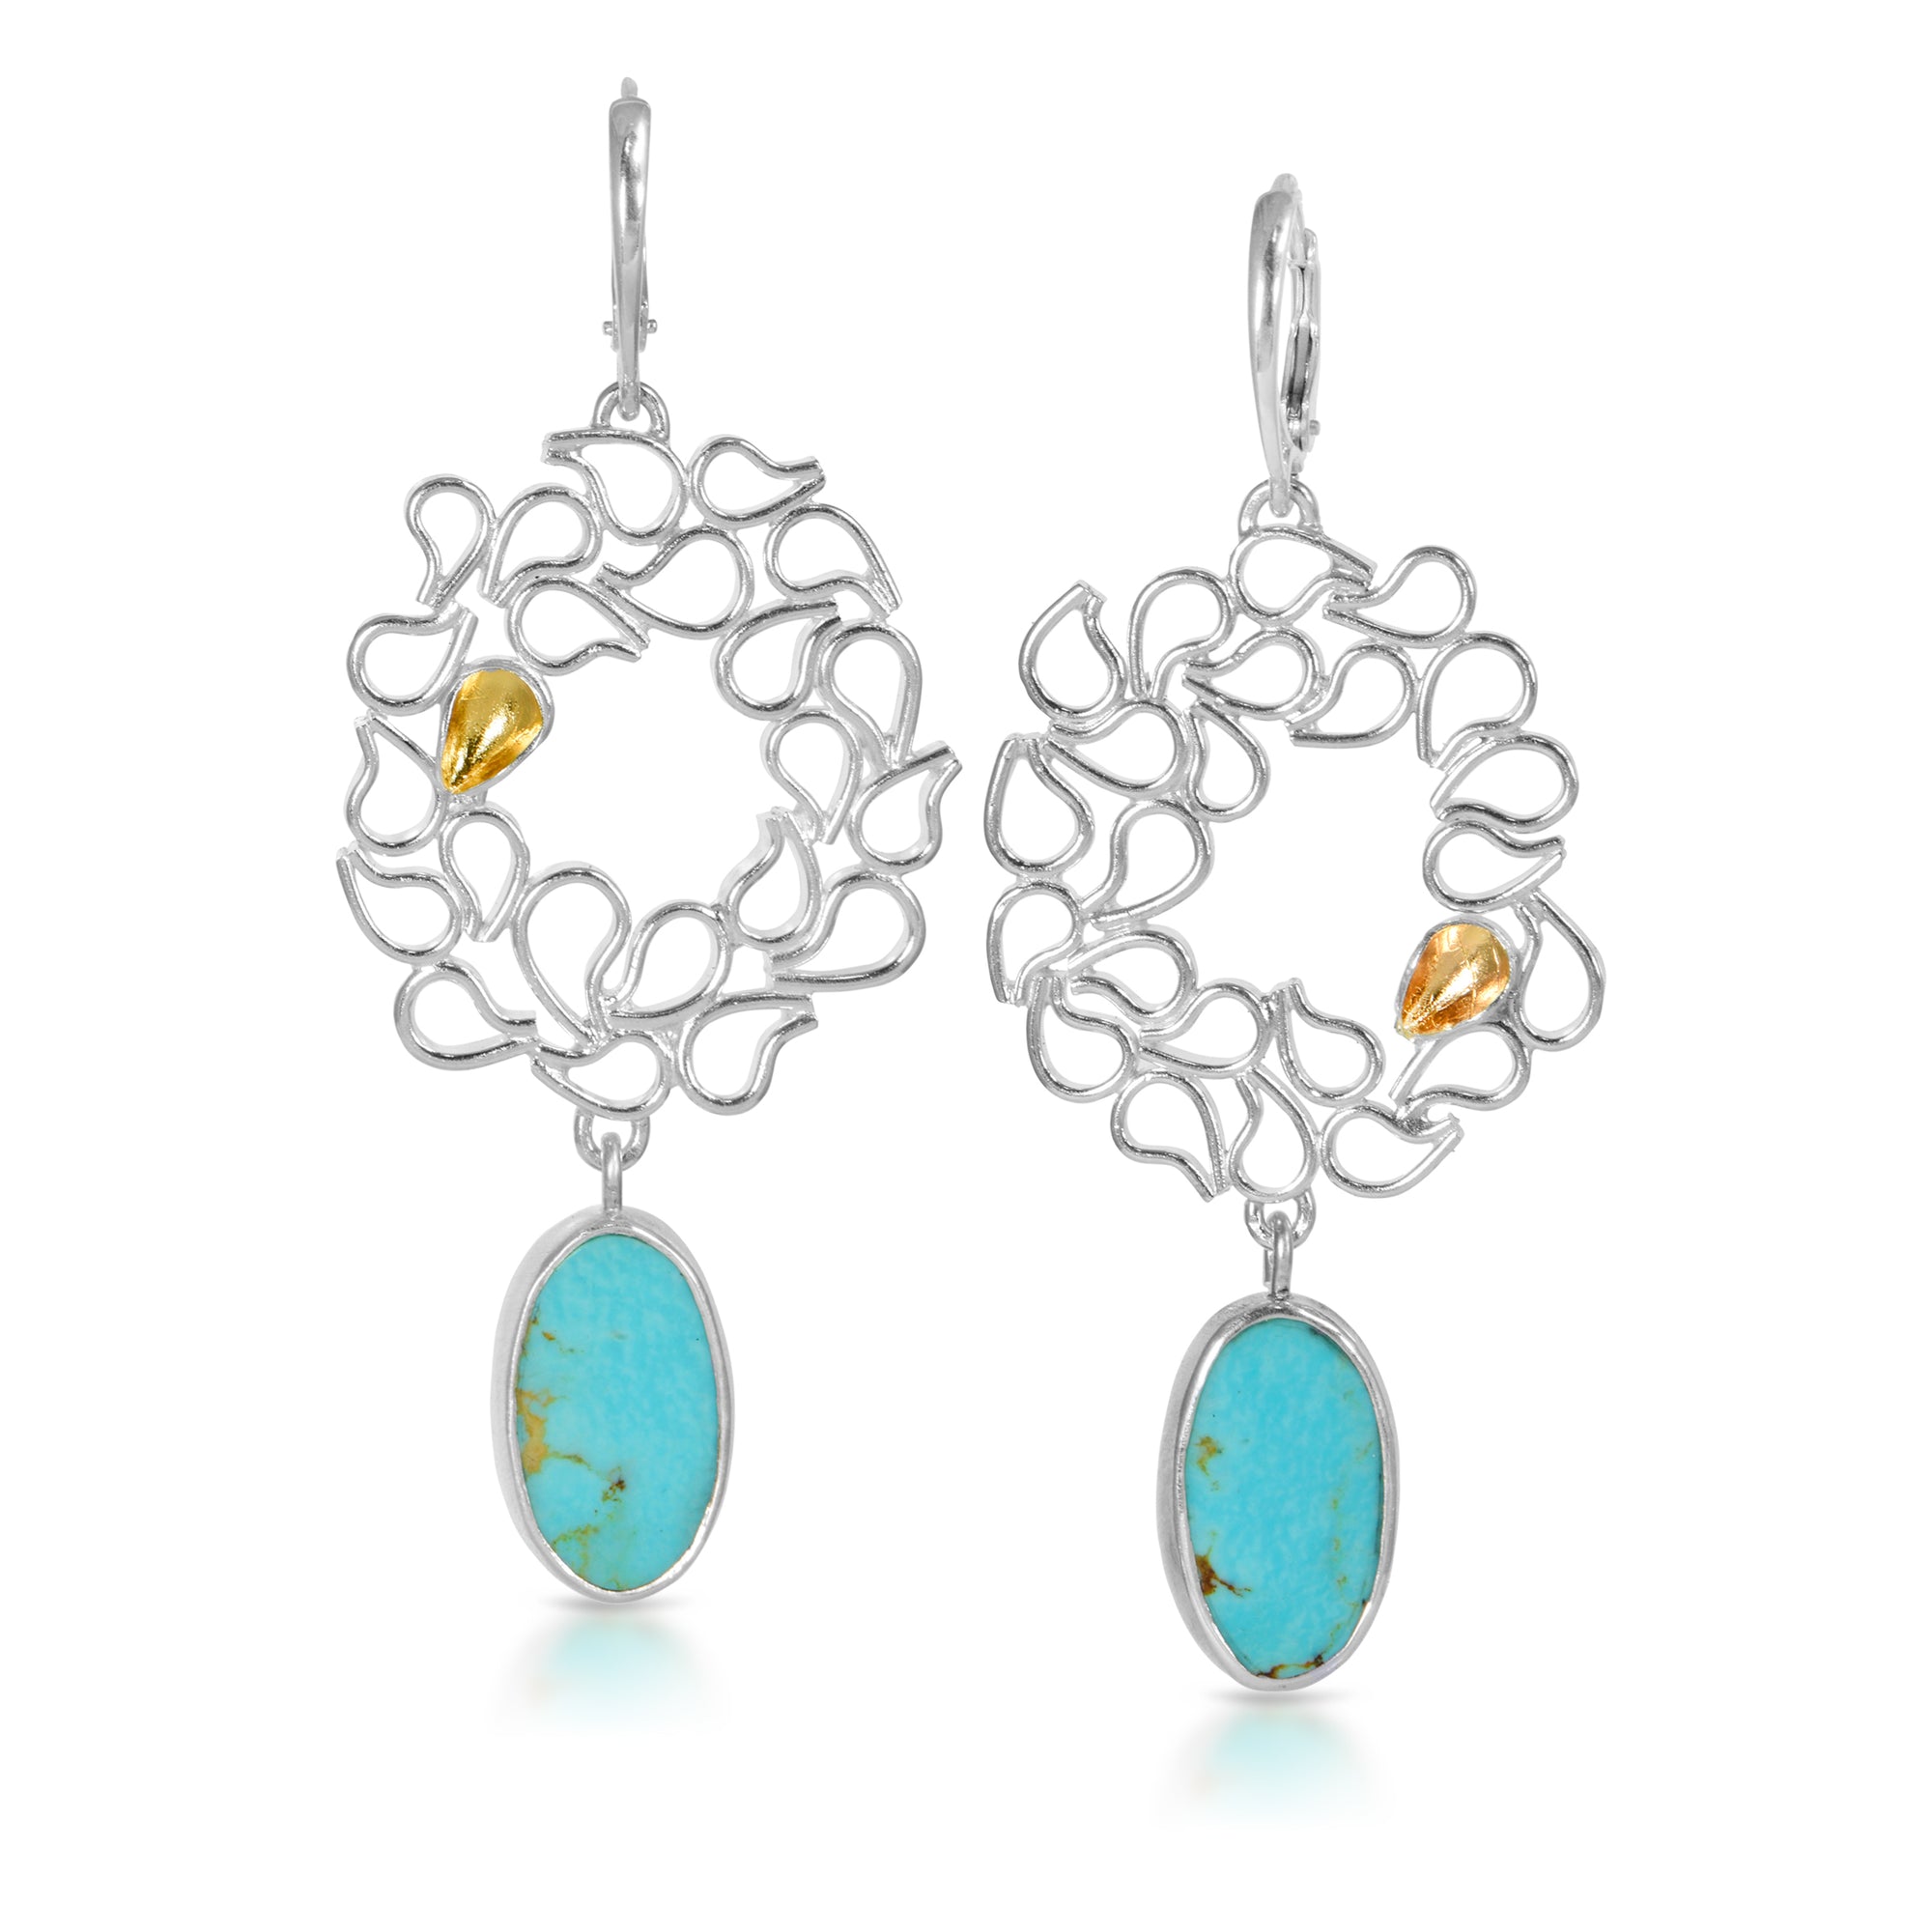 Puddles & Turquoise Earrings